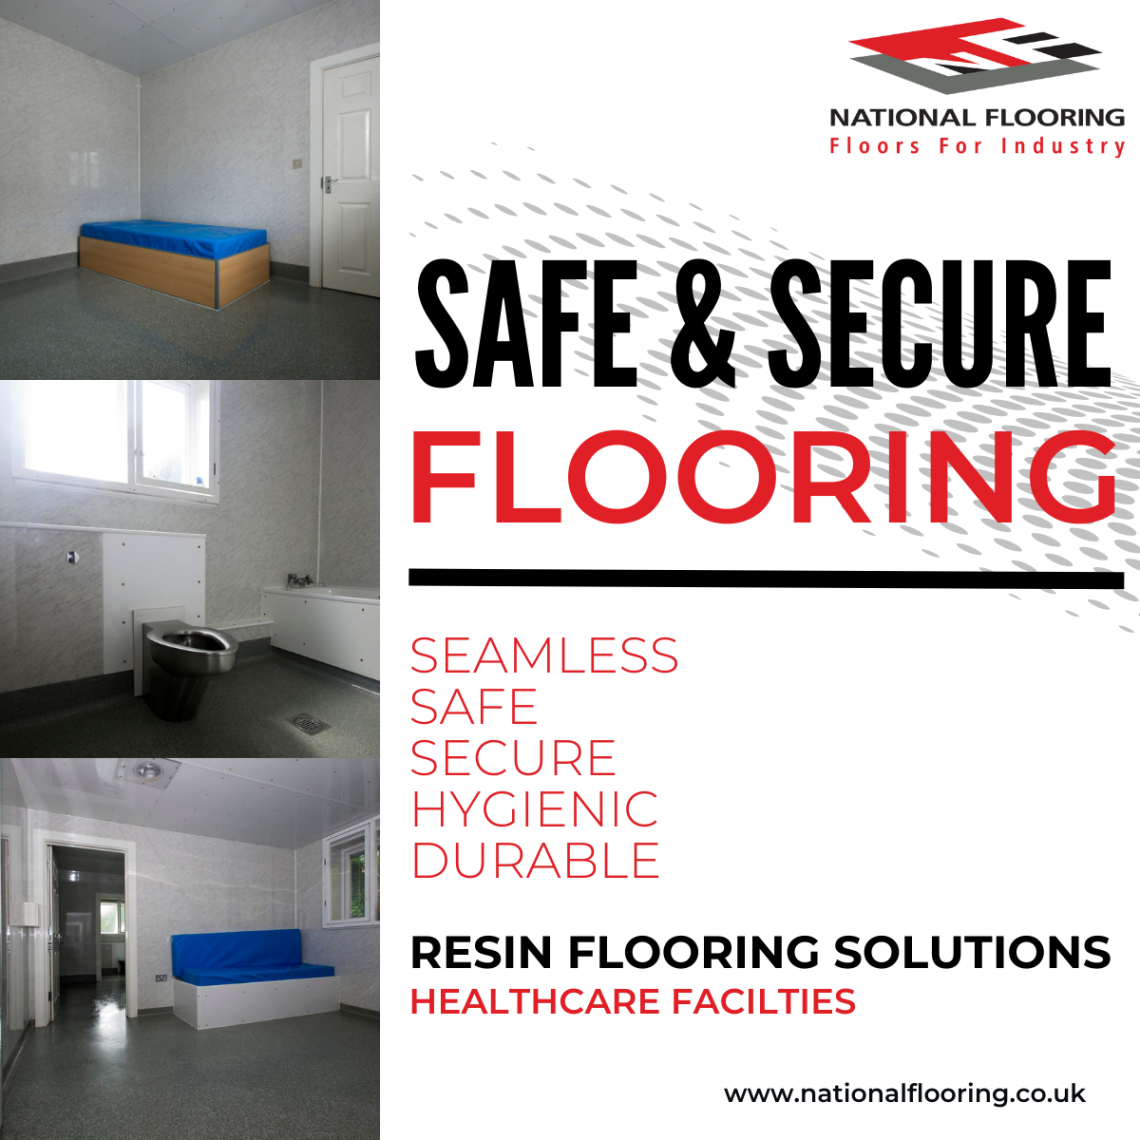 Protecting the safety of patients and staff within mental health facilities should start from the ground up with a hygienic resin flooring.